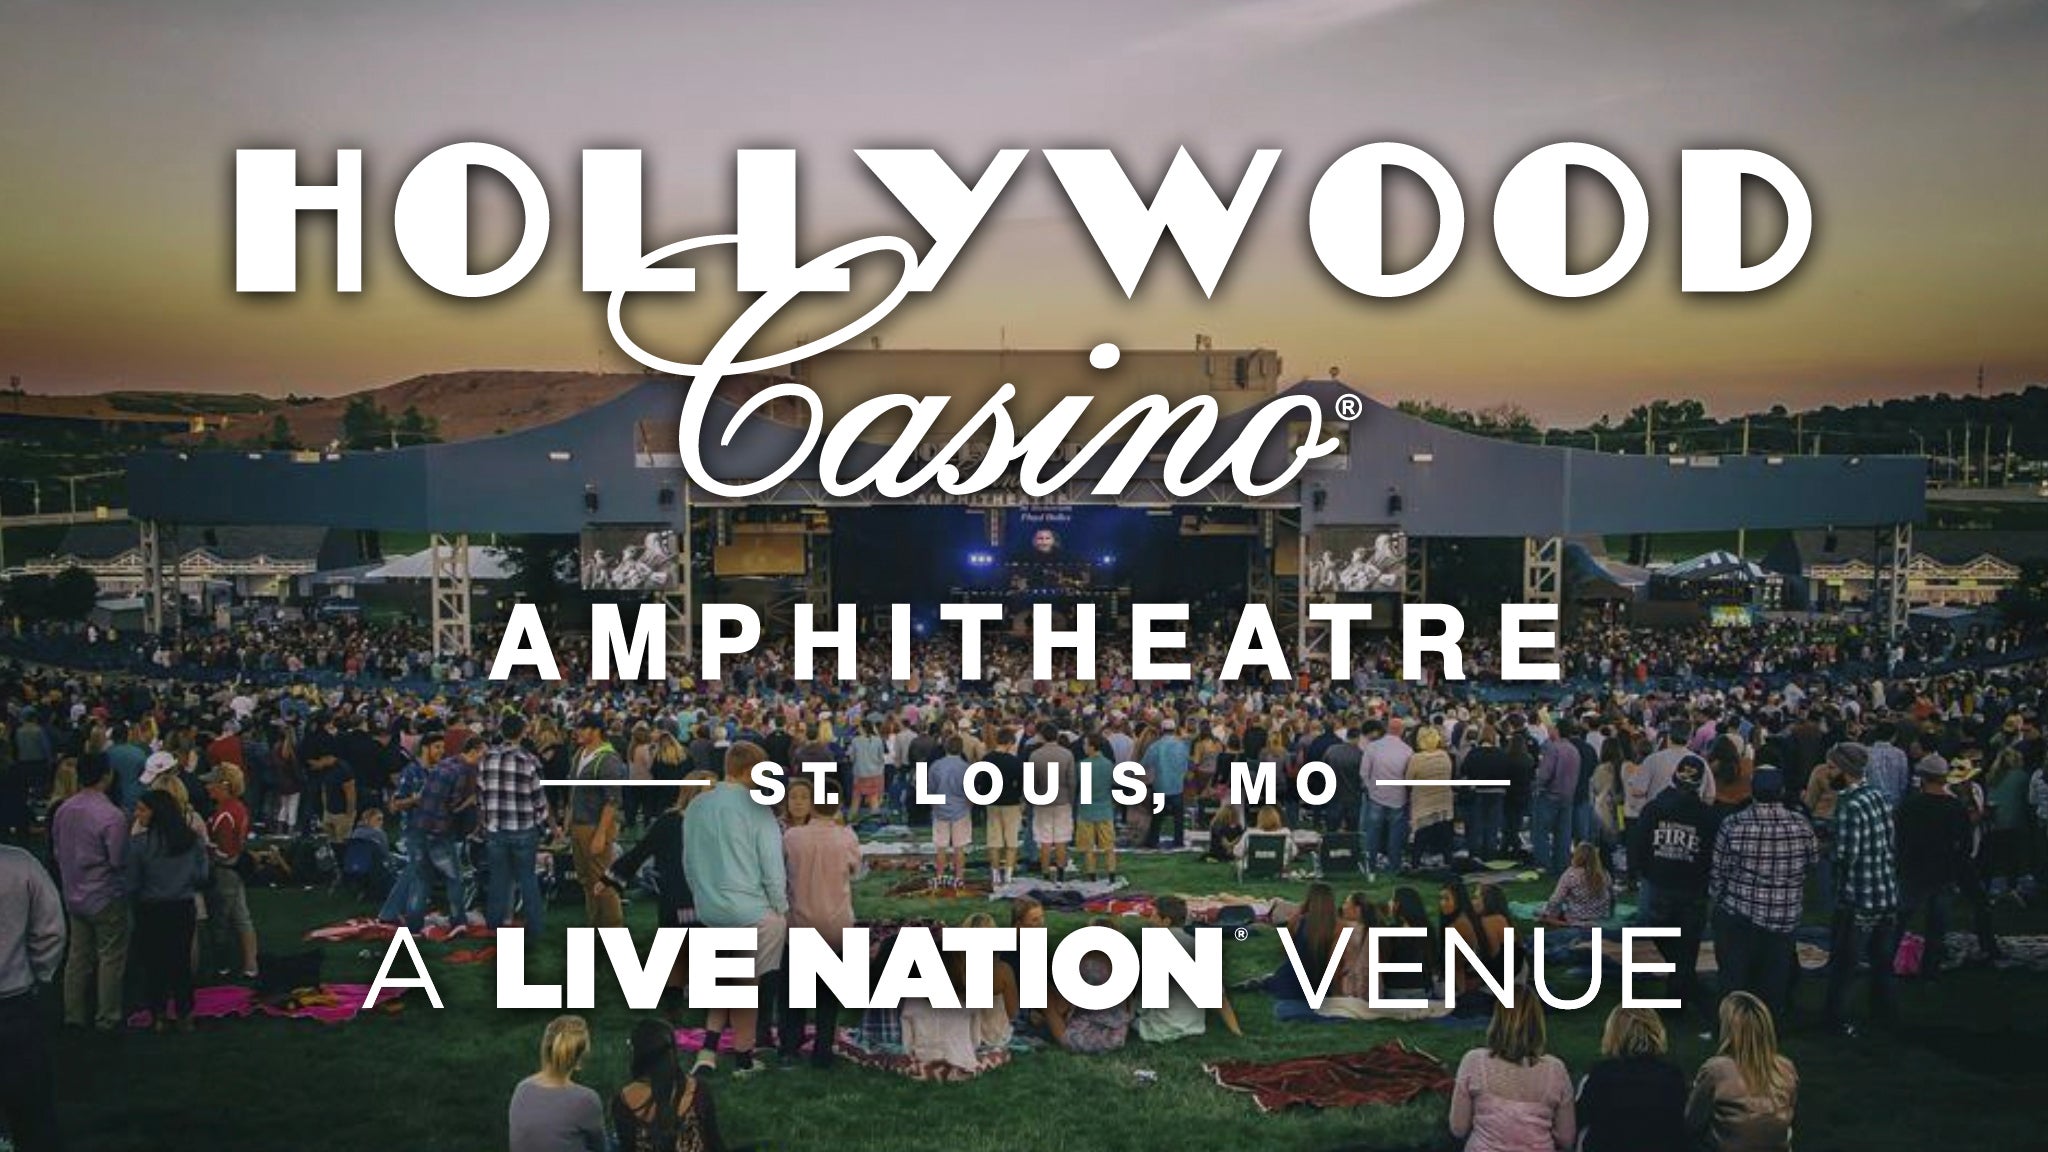 hollywood casino st louis shuttle to amphitheater